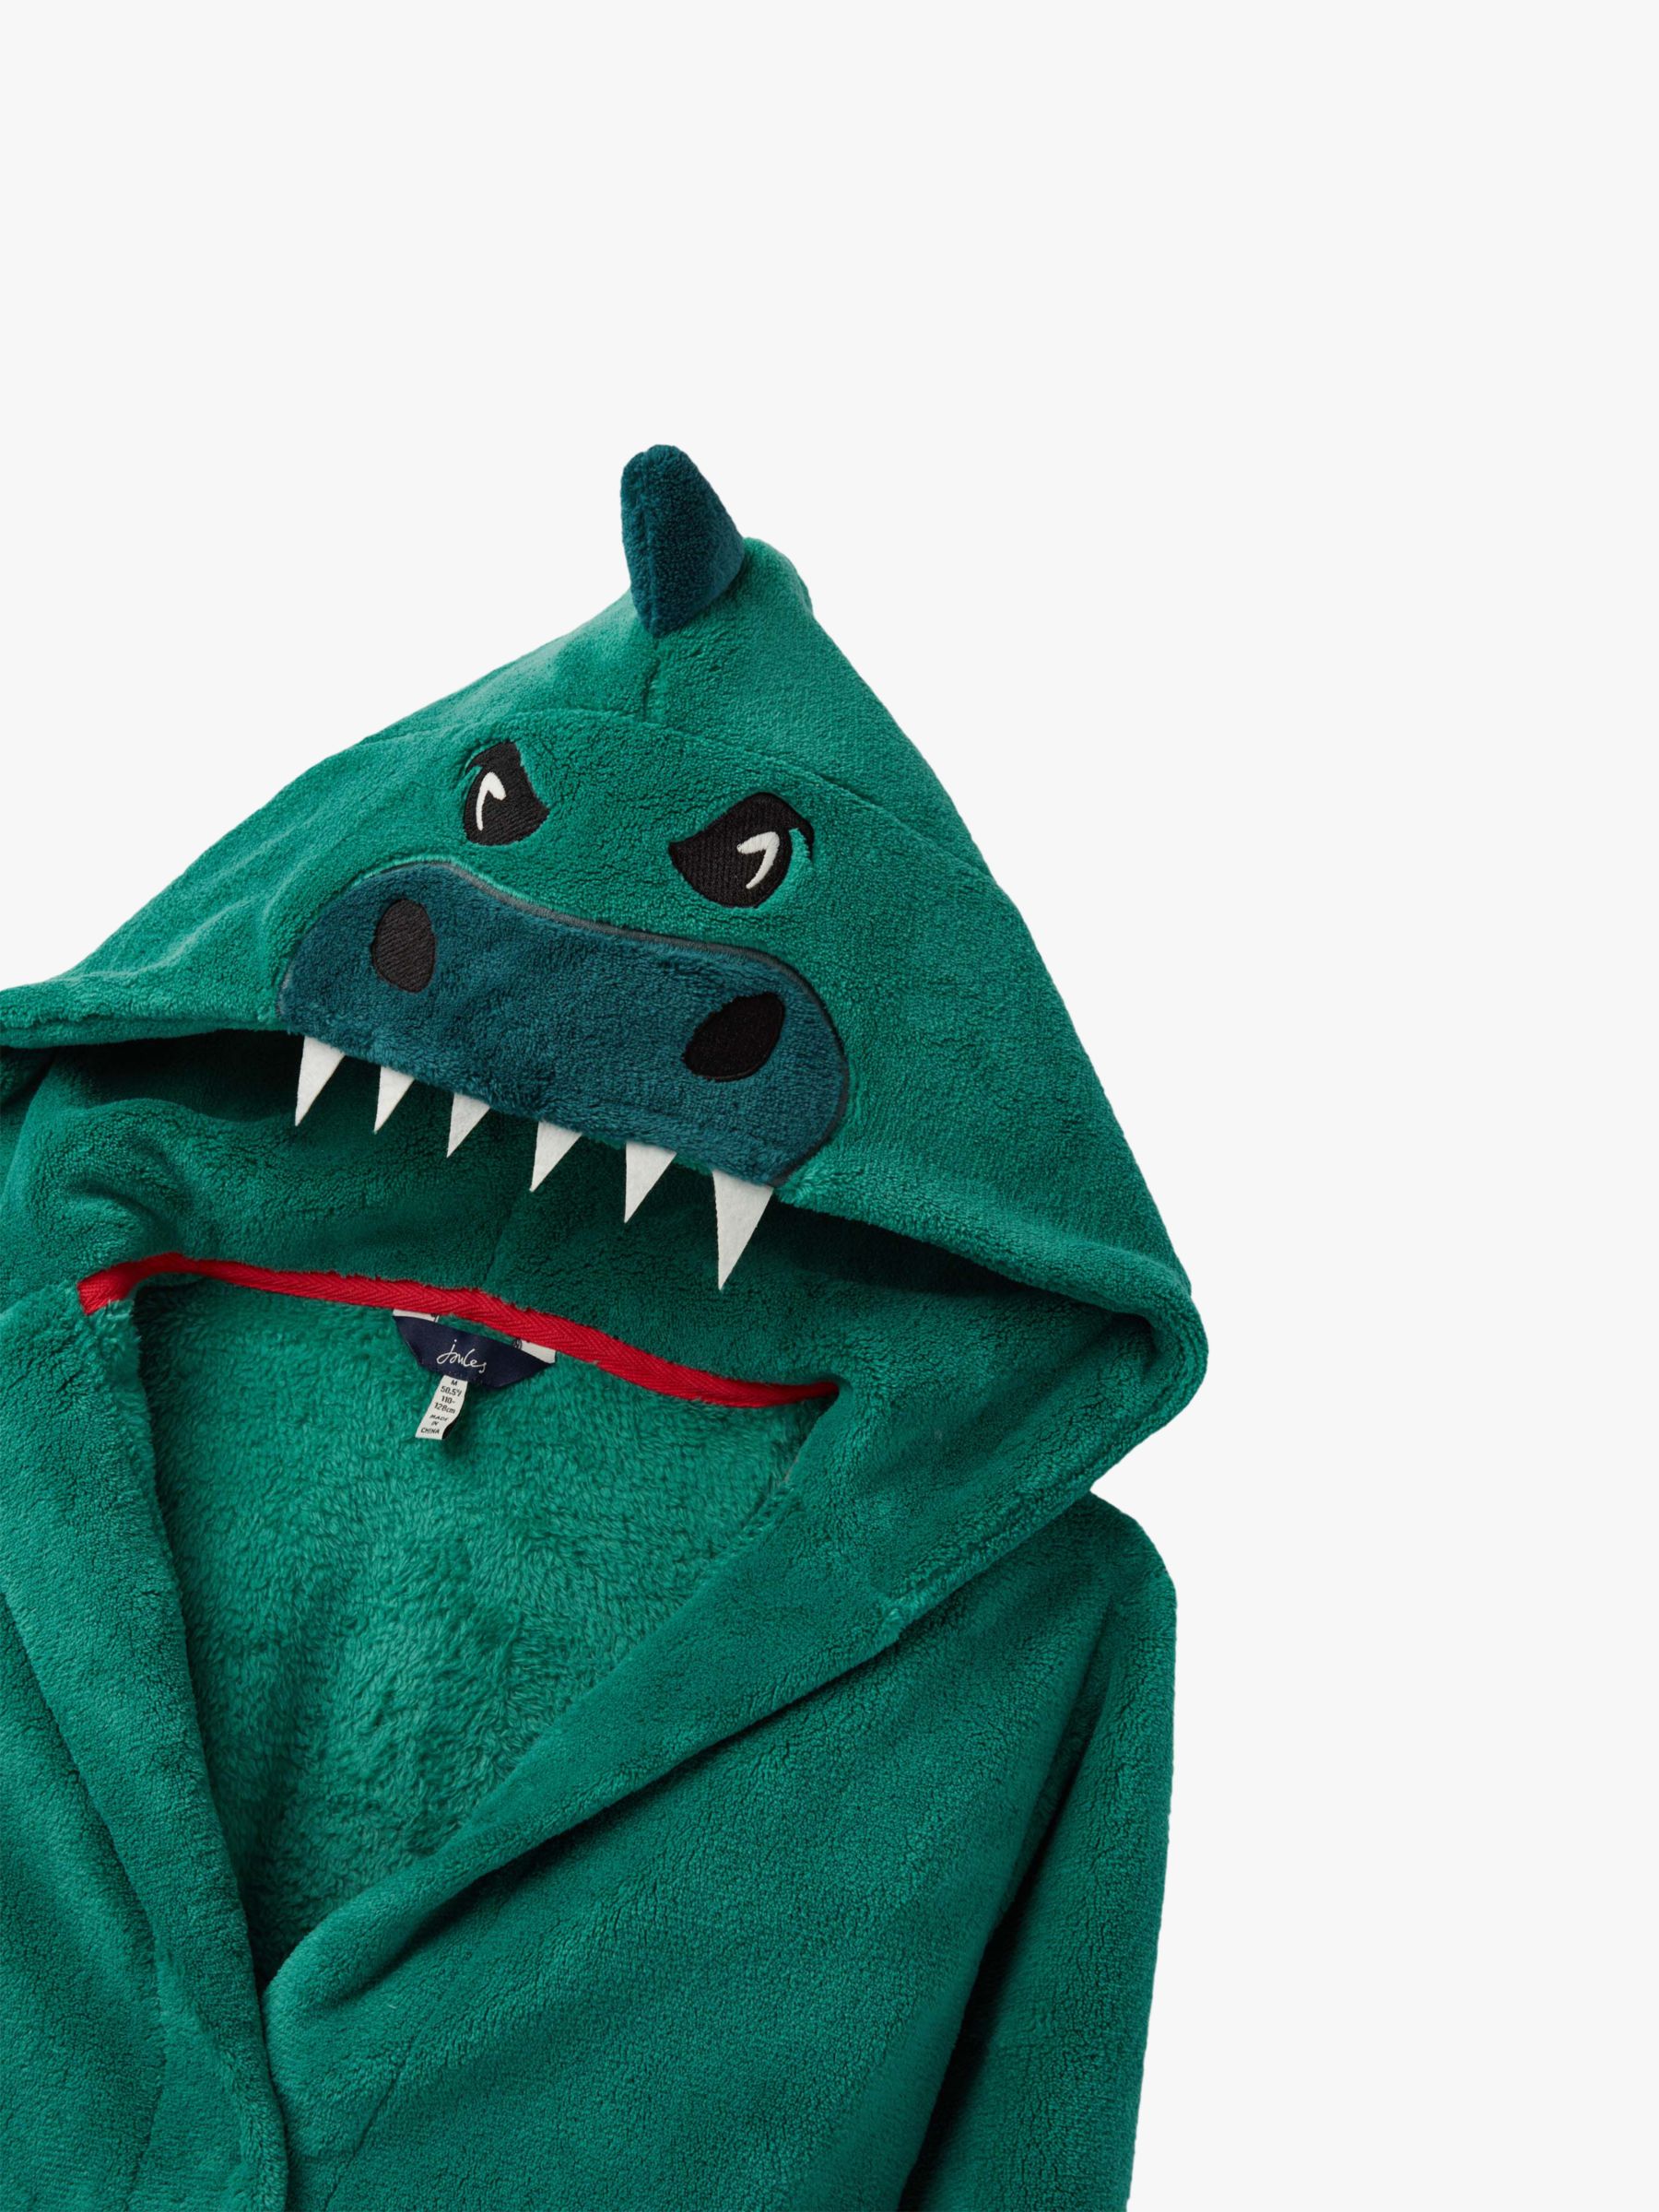 dino dressing gown